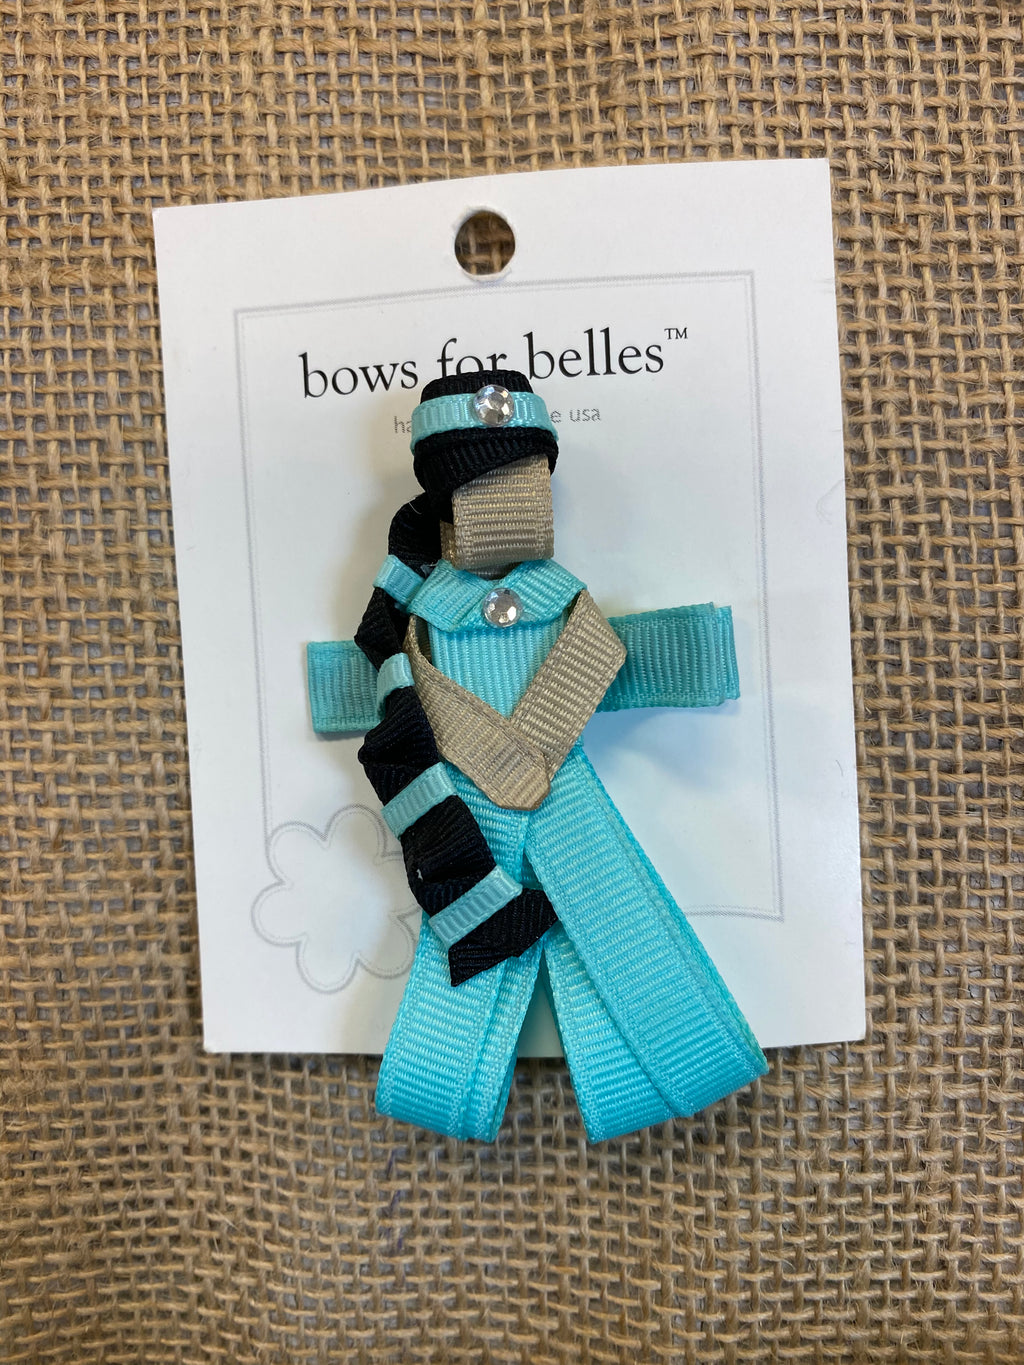 Bows for Belles Jasmine Bow